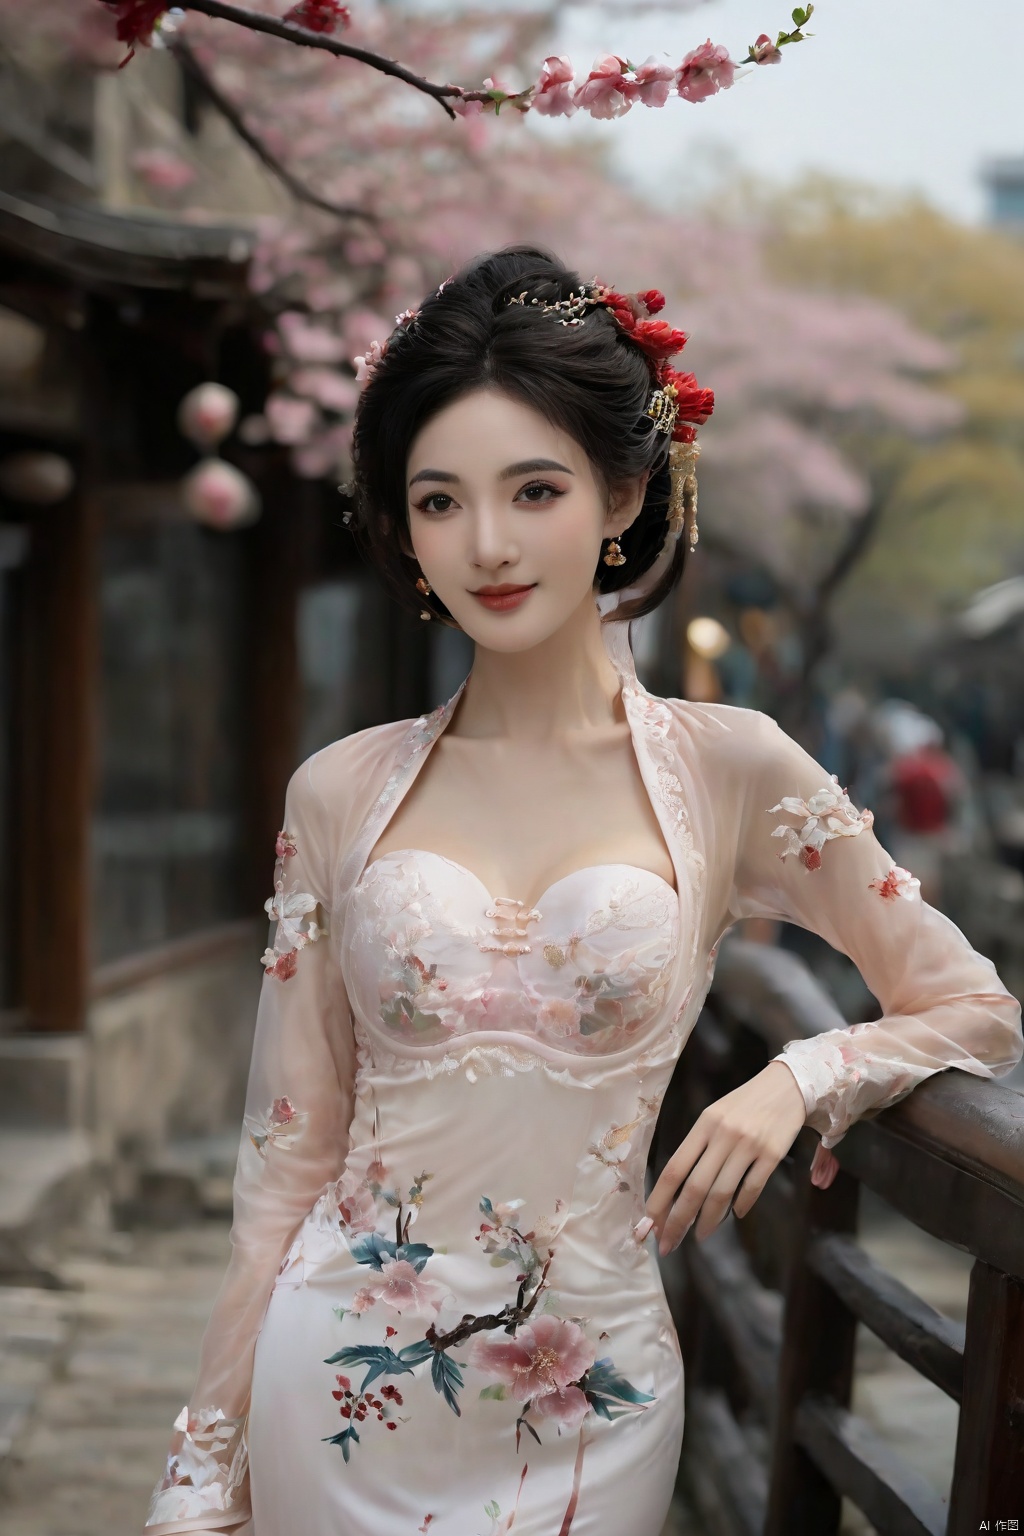  Realistic, photorealistic, masterpiece, best quality, dark shot, (photo of portrait:1.2), (1girl), (straight and round breasts:1.8), solo, smile, looking at viewer, long black hair, Full-body photos, (Wearing a pink Chinese wedding dress on the outside and a white lace semi transparent bra on the inside:1.8), (an ancient bride adorned with gold hairpins and silver jewelry), an extremely delicate and beautiful, real person, fair skin, ((Slender and perfect long legs)), ((perfect hands)), (perfect hands:1.5), plentiful breasts, (see through:1.5), (blackpantyhose:1.2), (plump chest), (Suzhou Garden:1.3), (cherry blossom trees:1.1), petals, falling petals, petals, falling petals, Lantern, Realistic Scene, Canon D50 Shooting, wedding gown, qipao